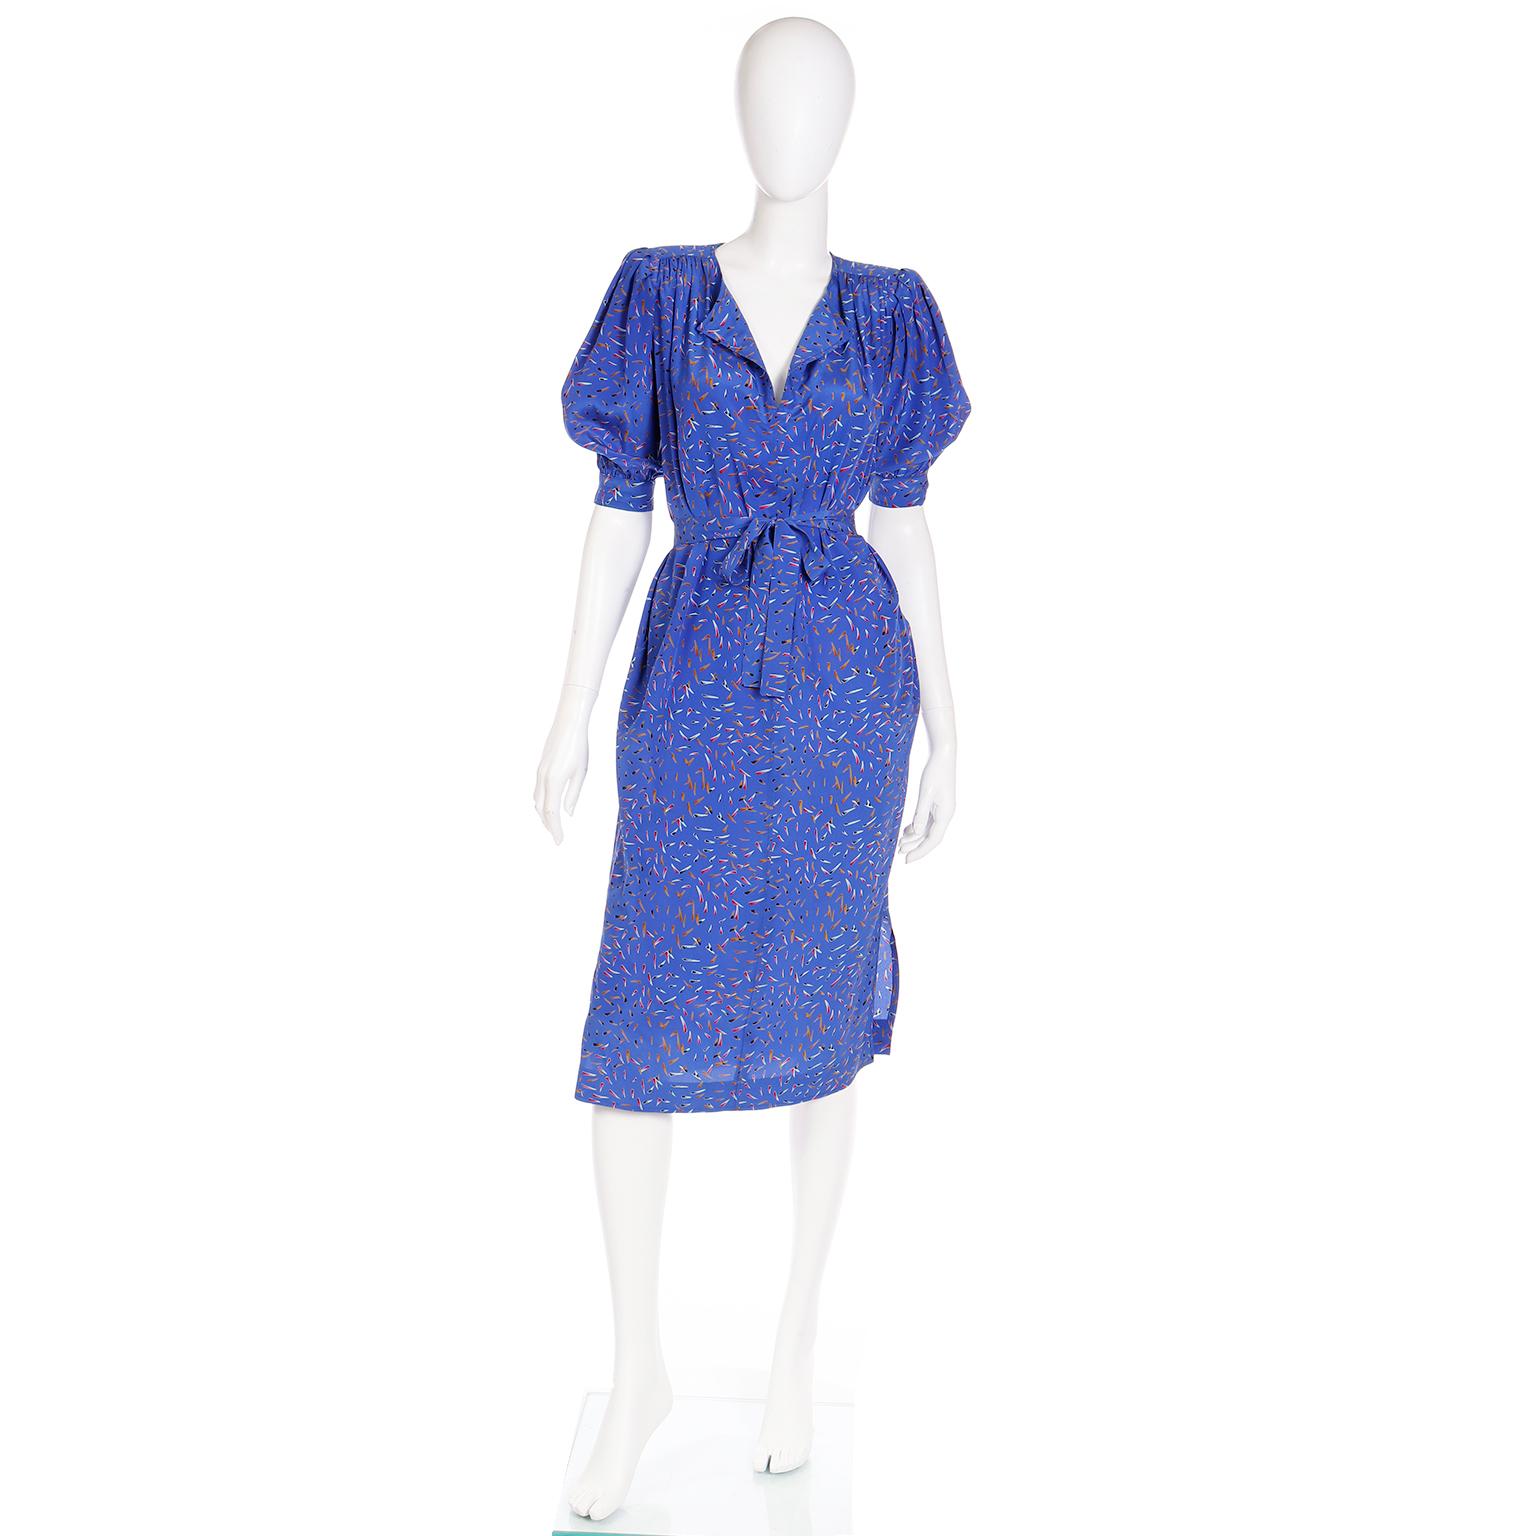 This vintage blue silk vintage Ungaro Parallele dress comes with a fabric sash and is in excellent condition. The print resembles multi colored tiny feathers or arrows.The dress has pretty gathering at the shoulders, side slit pockets, shoulder